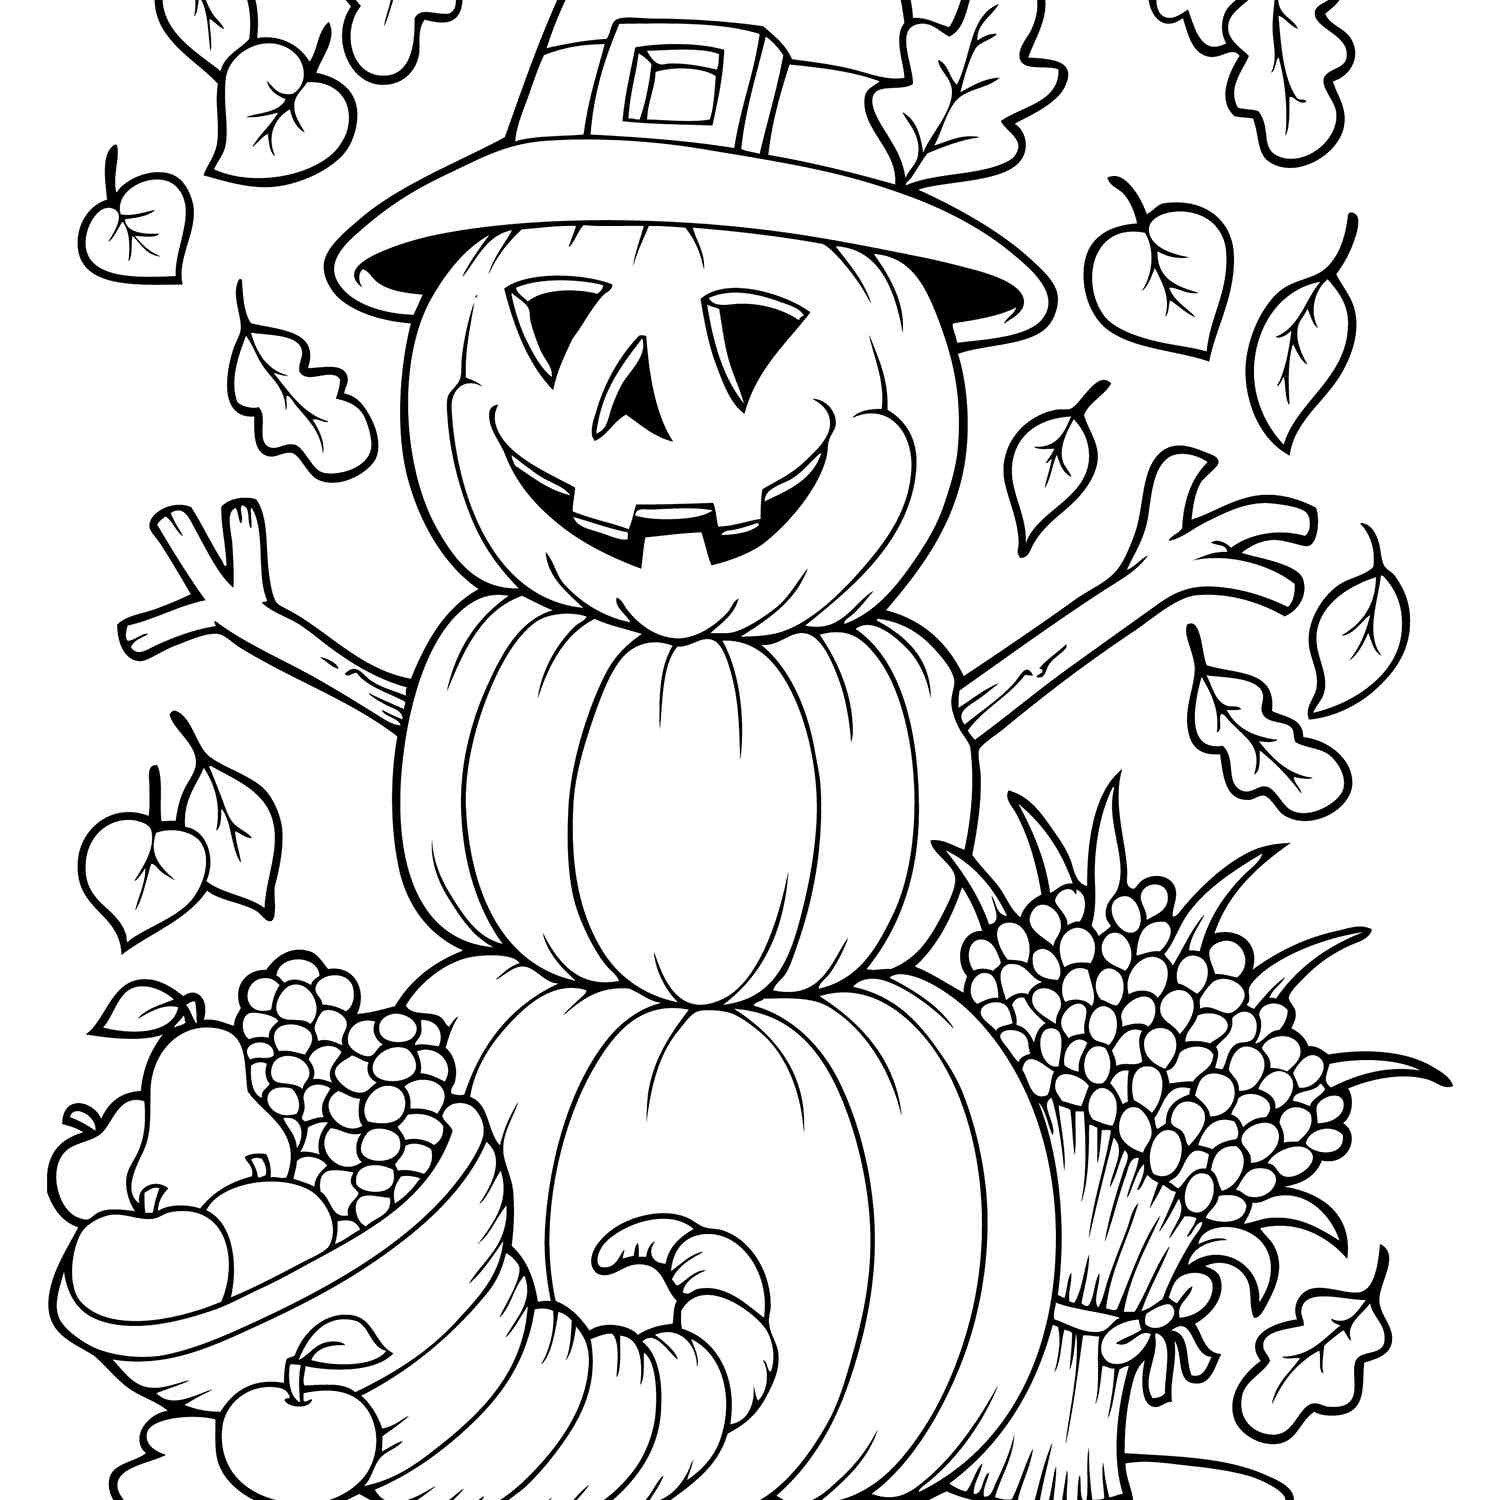 Free Printable Fall Coloring Pages
 Free Autumn and Fall Coloring Pages